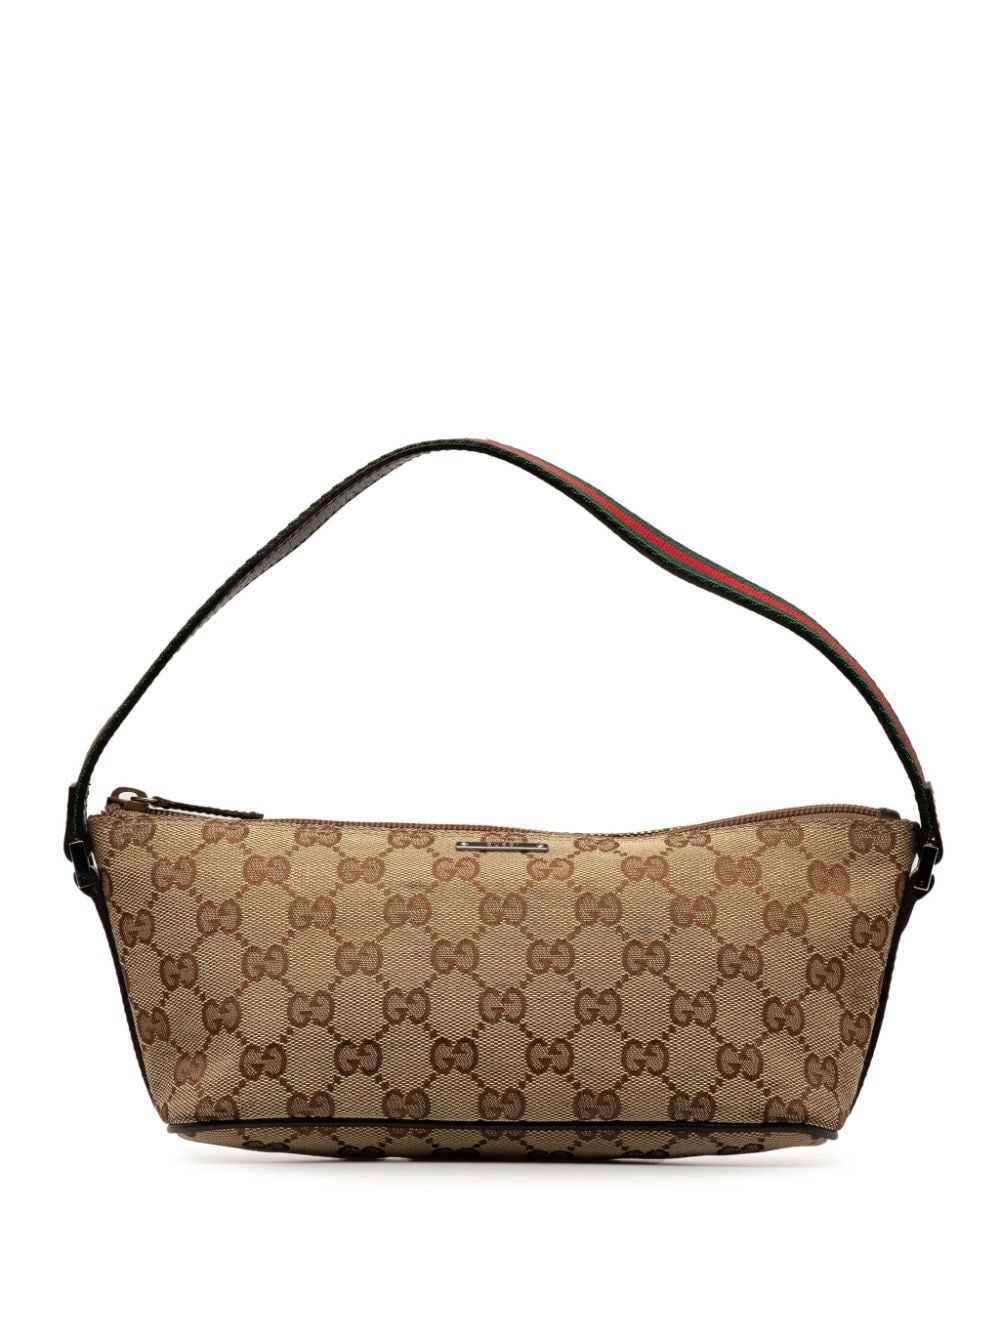 Pre-owned Gucci 2000-2015 Gg Canvas Web Boat Shoulder Bag In 褐色